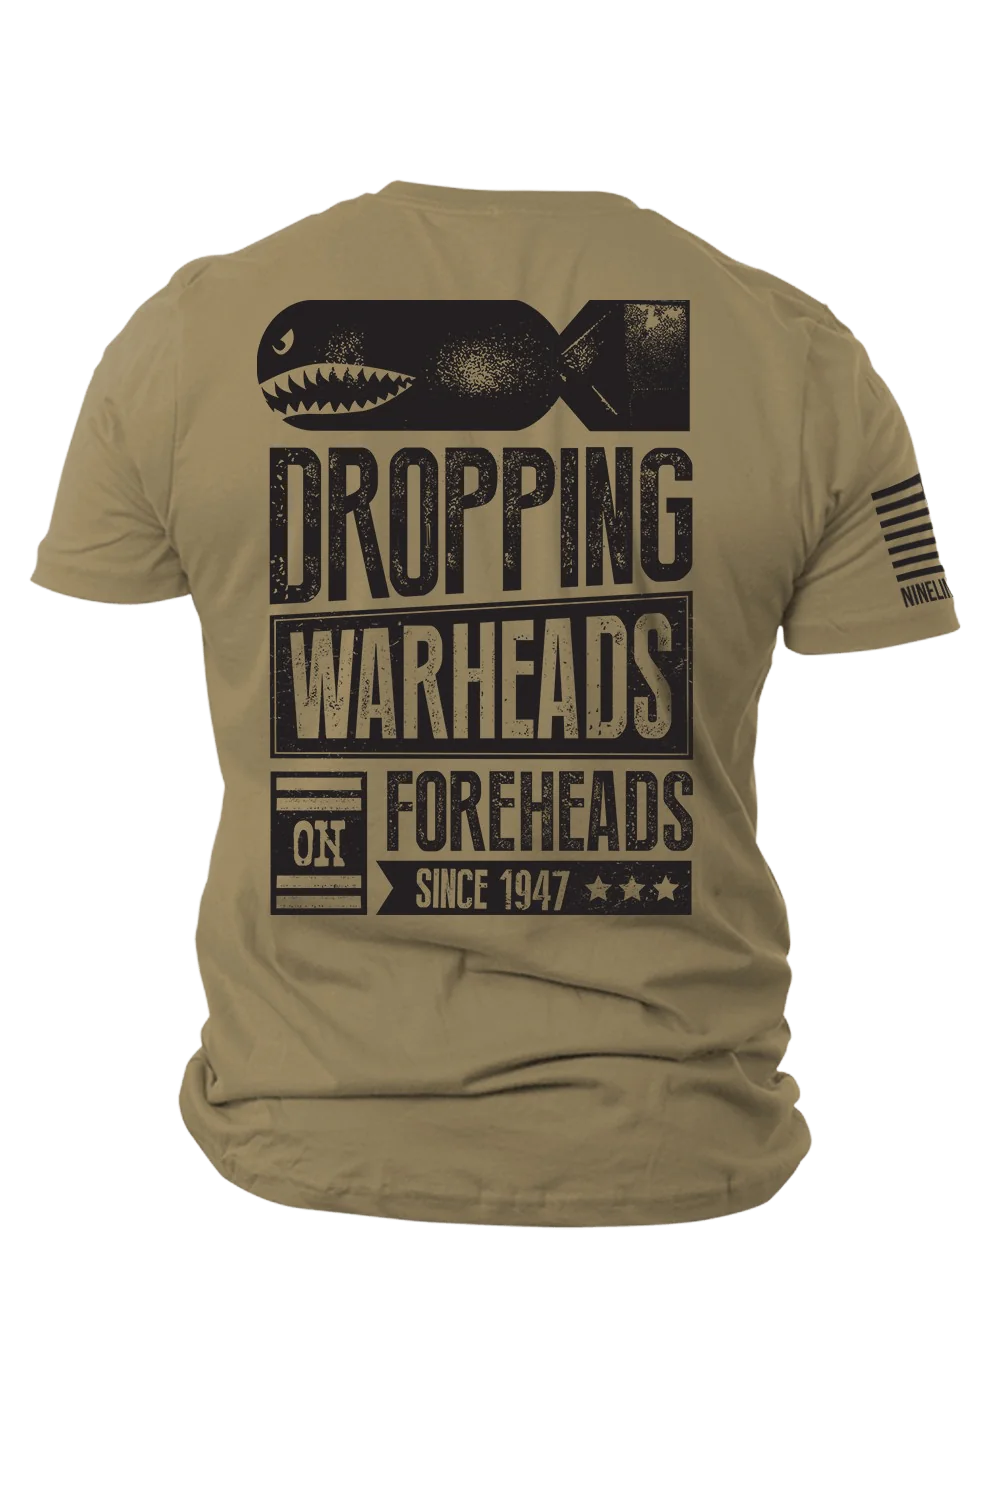 Nine Line T-Shirt - Warheads on Foreheads posted by ProdOrigin USA in Men's Apparel